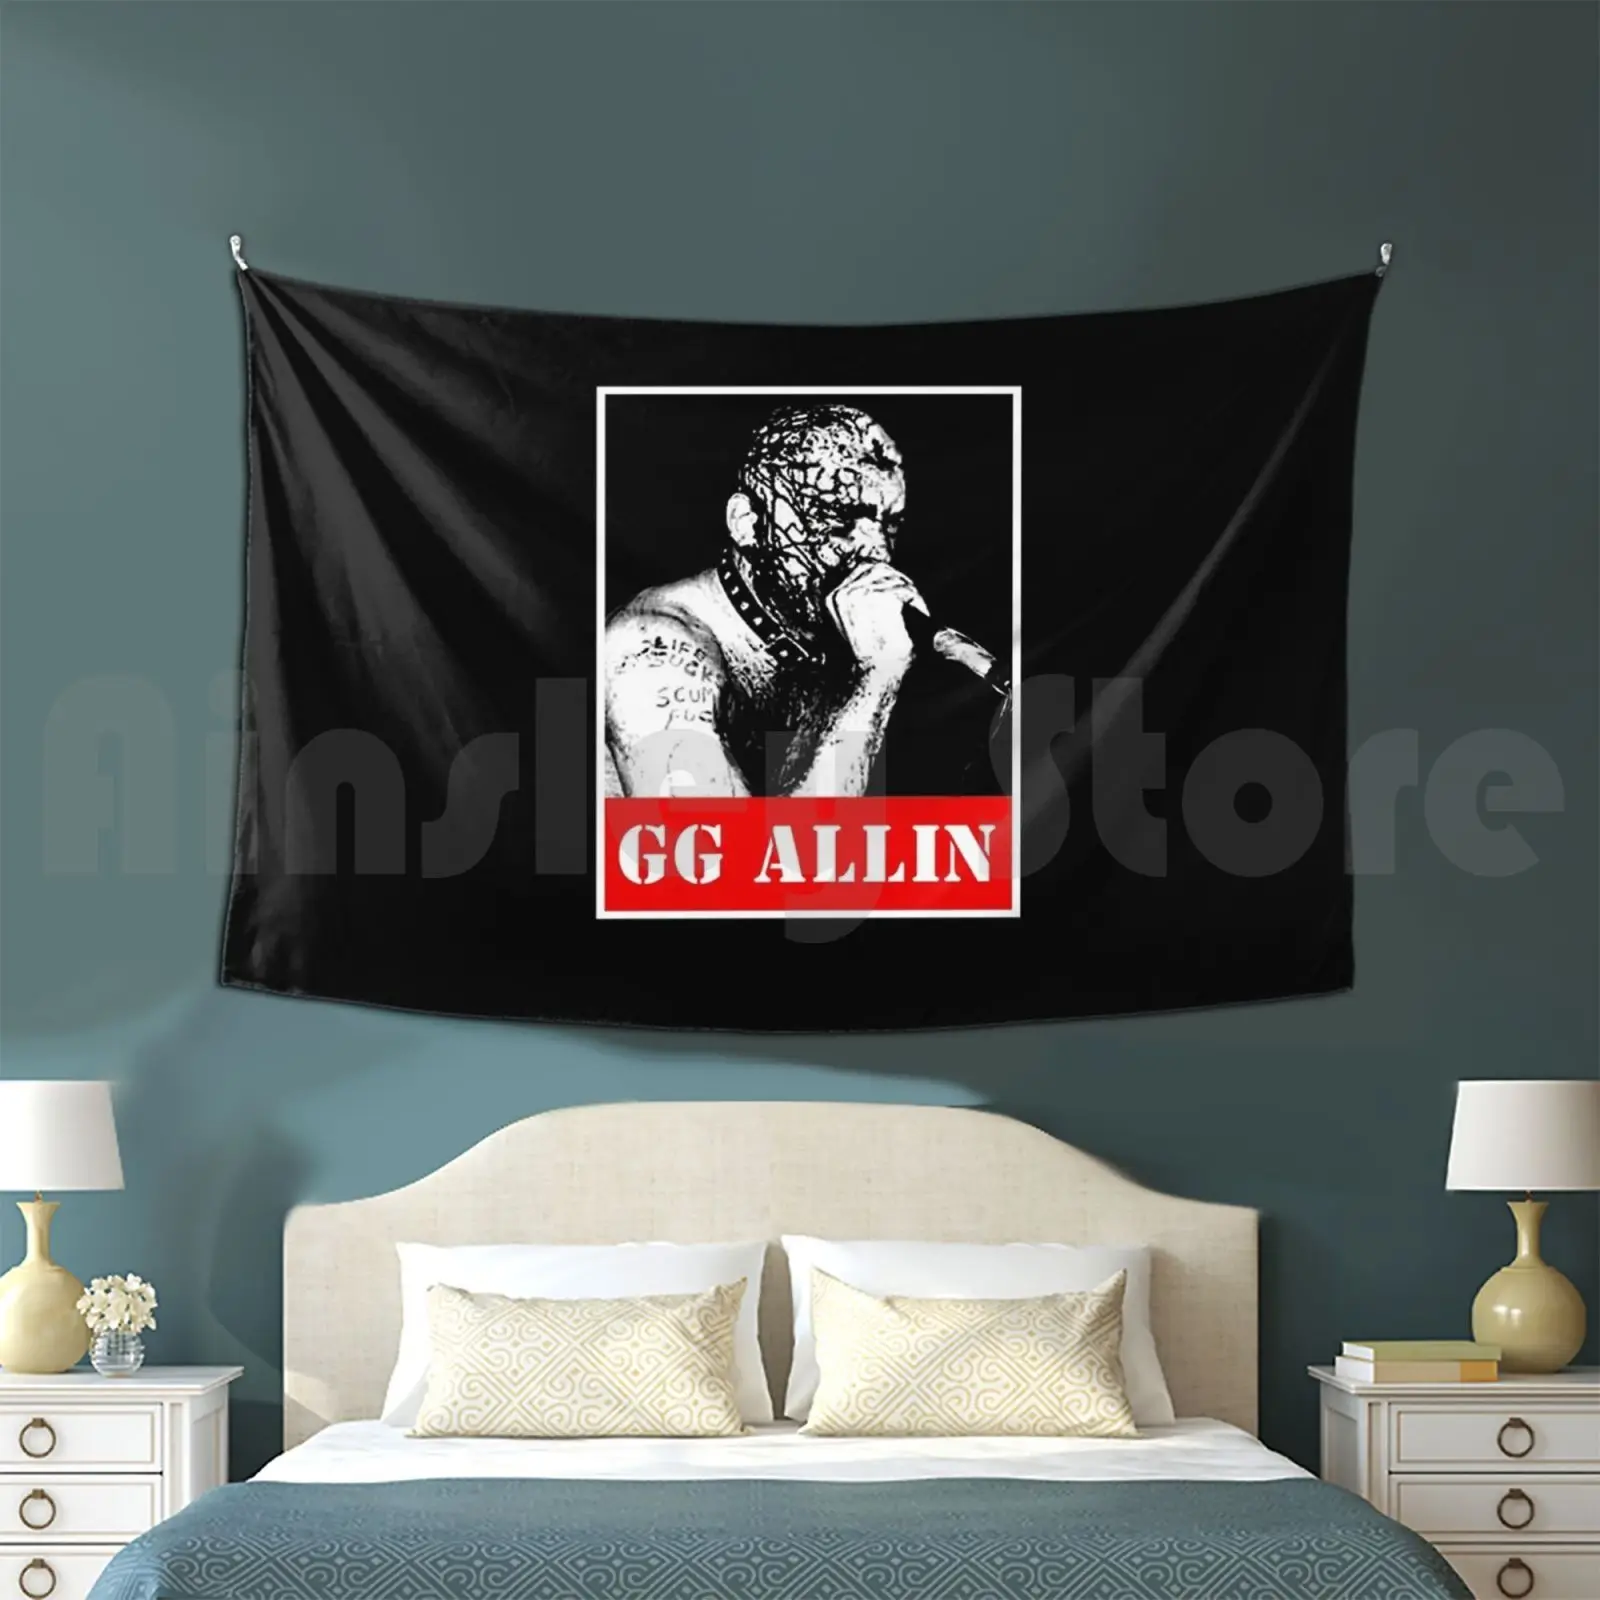 

Gg Allin Tapestry Living Room Bedroom Gg Allin Hated In The Nation Usa Punk Punk Music Gg Die Gg Scum Idles Skinhead